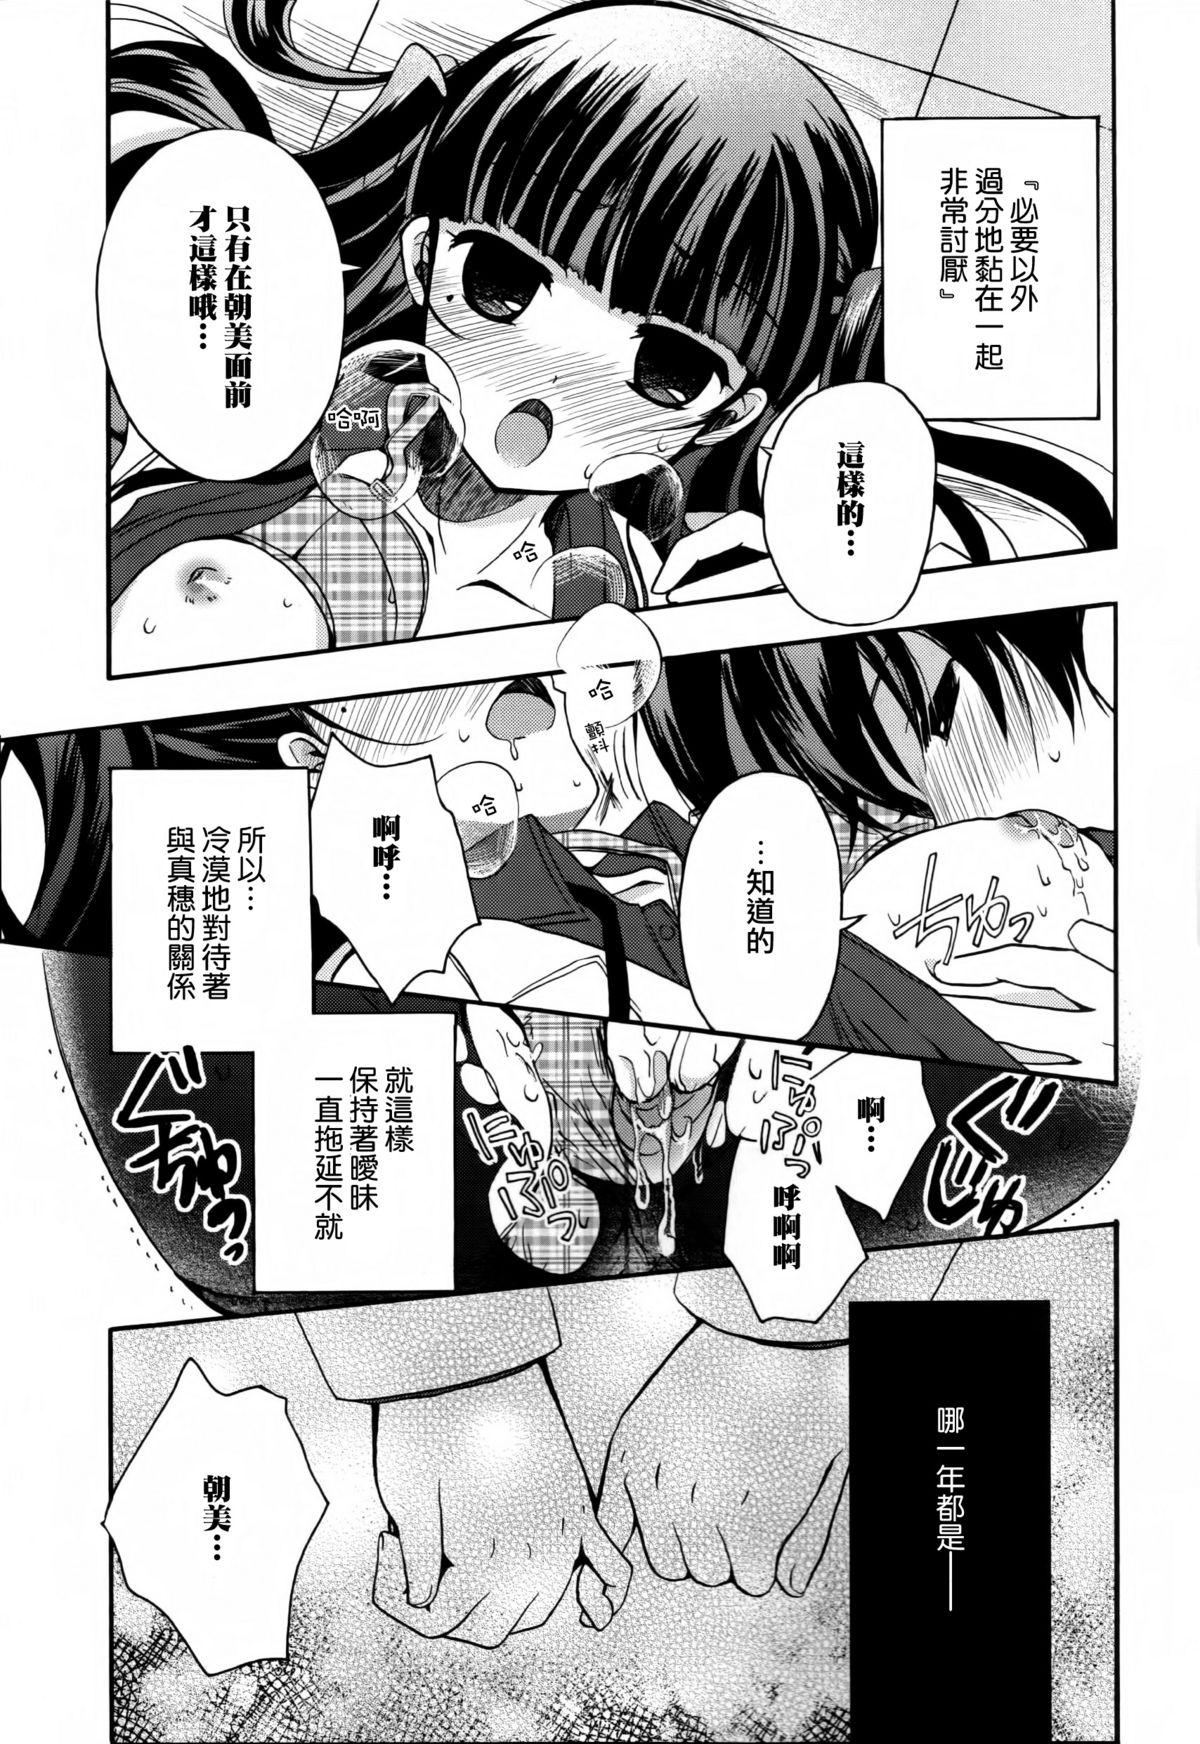 [Anthology] Ki Yuri -Falling In Love With A Classmate- [Chinese] [Dora烧鸡个人汉化] page 10 full